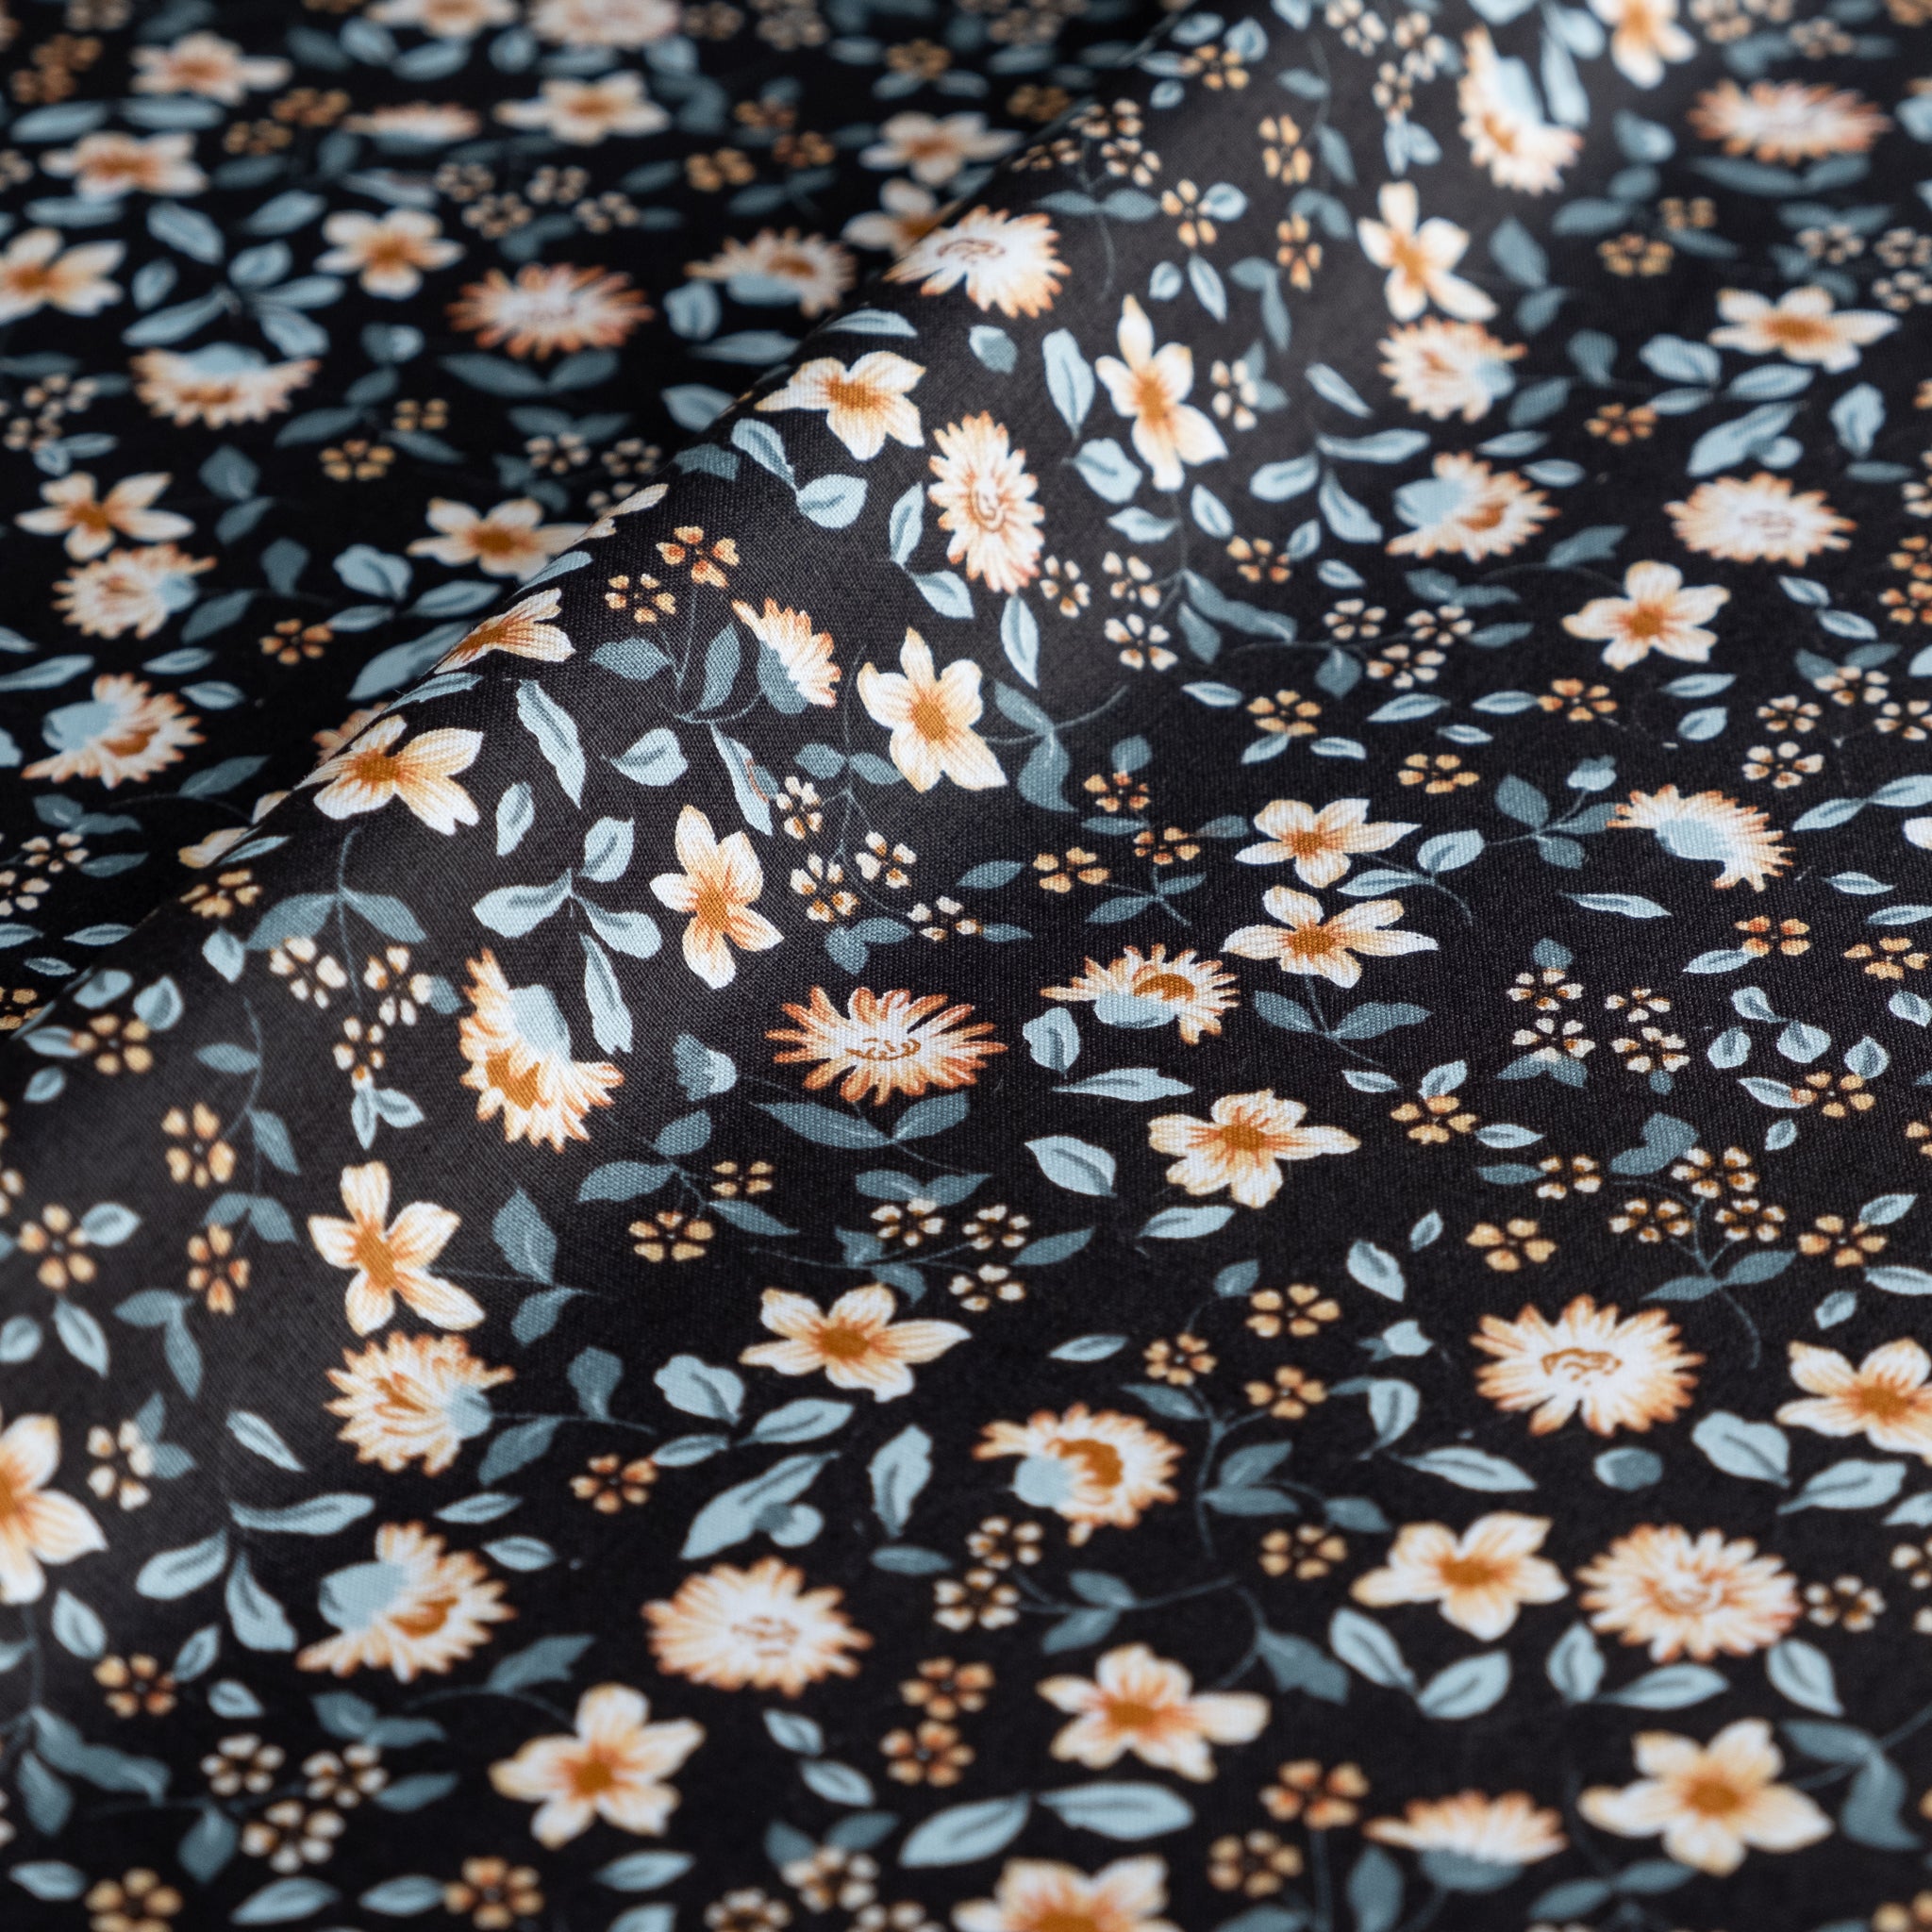 Floral Fabric ~ Ditsy Floral Print ~ Navy ~ 100% Cotton Poplin Fabric